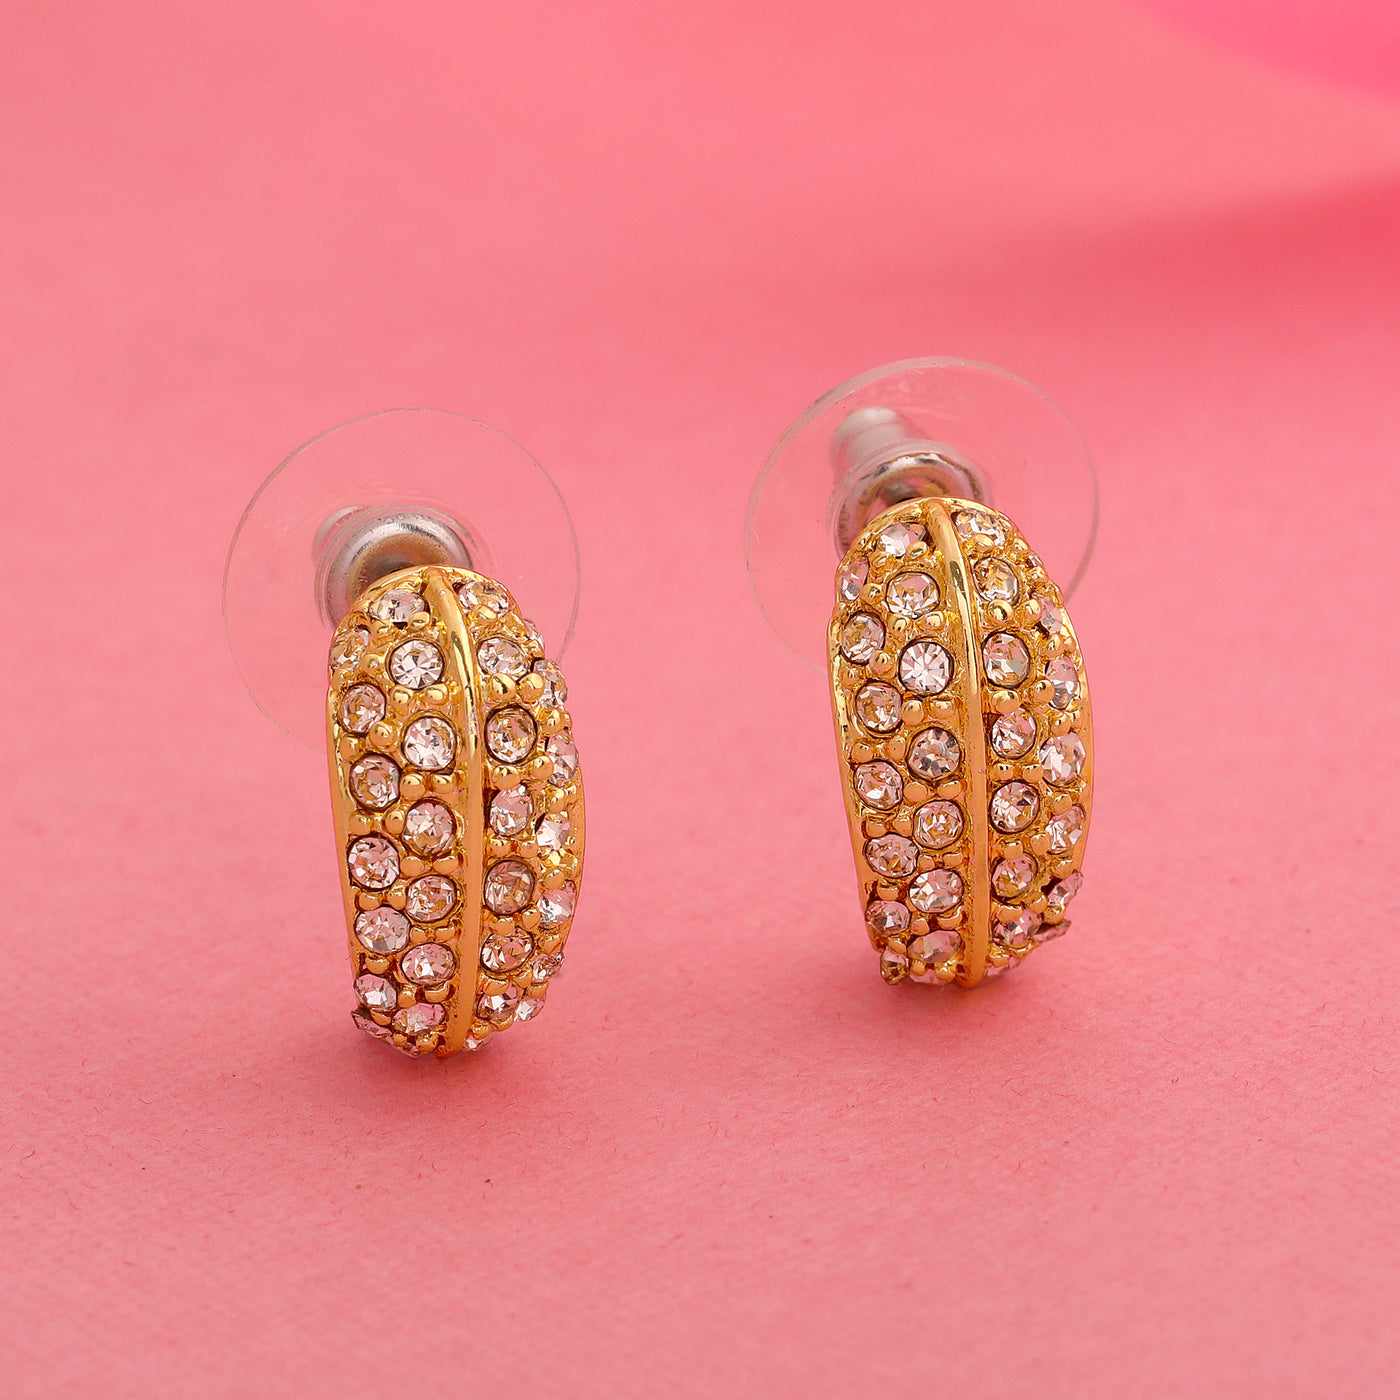 24Kt Gold Plated Candy Earring with White Crystals